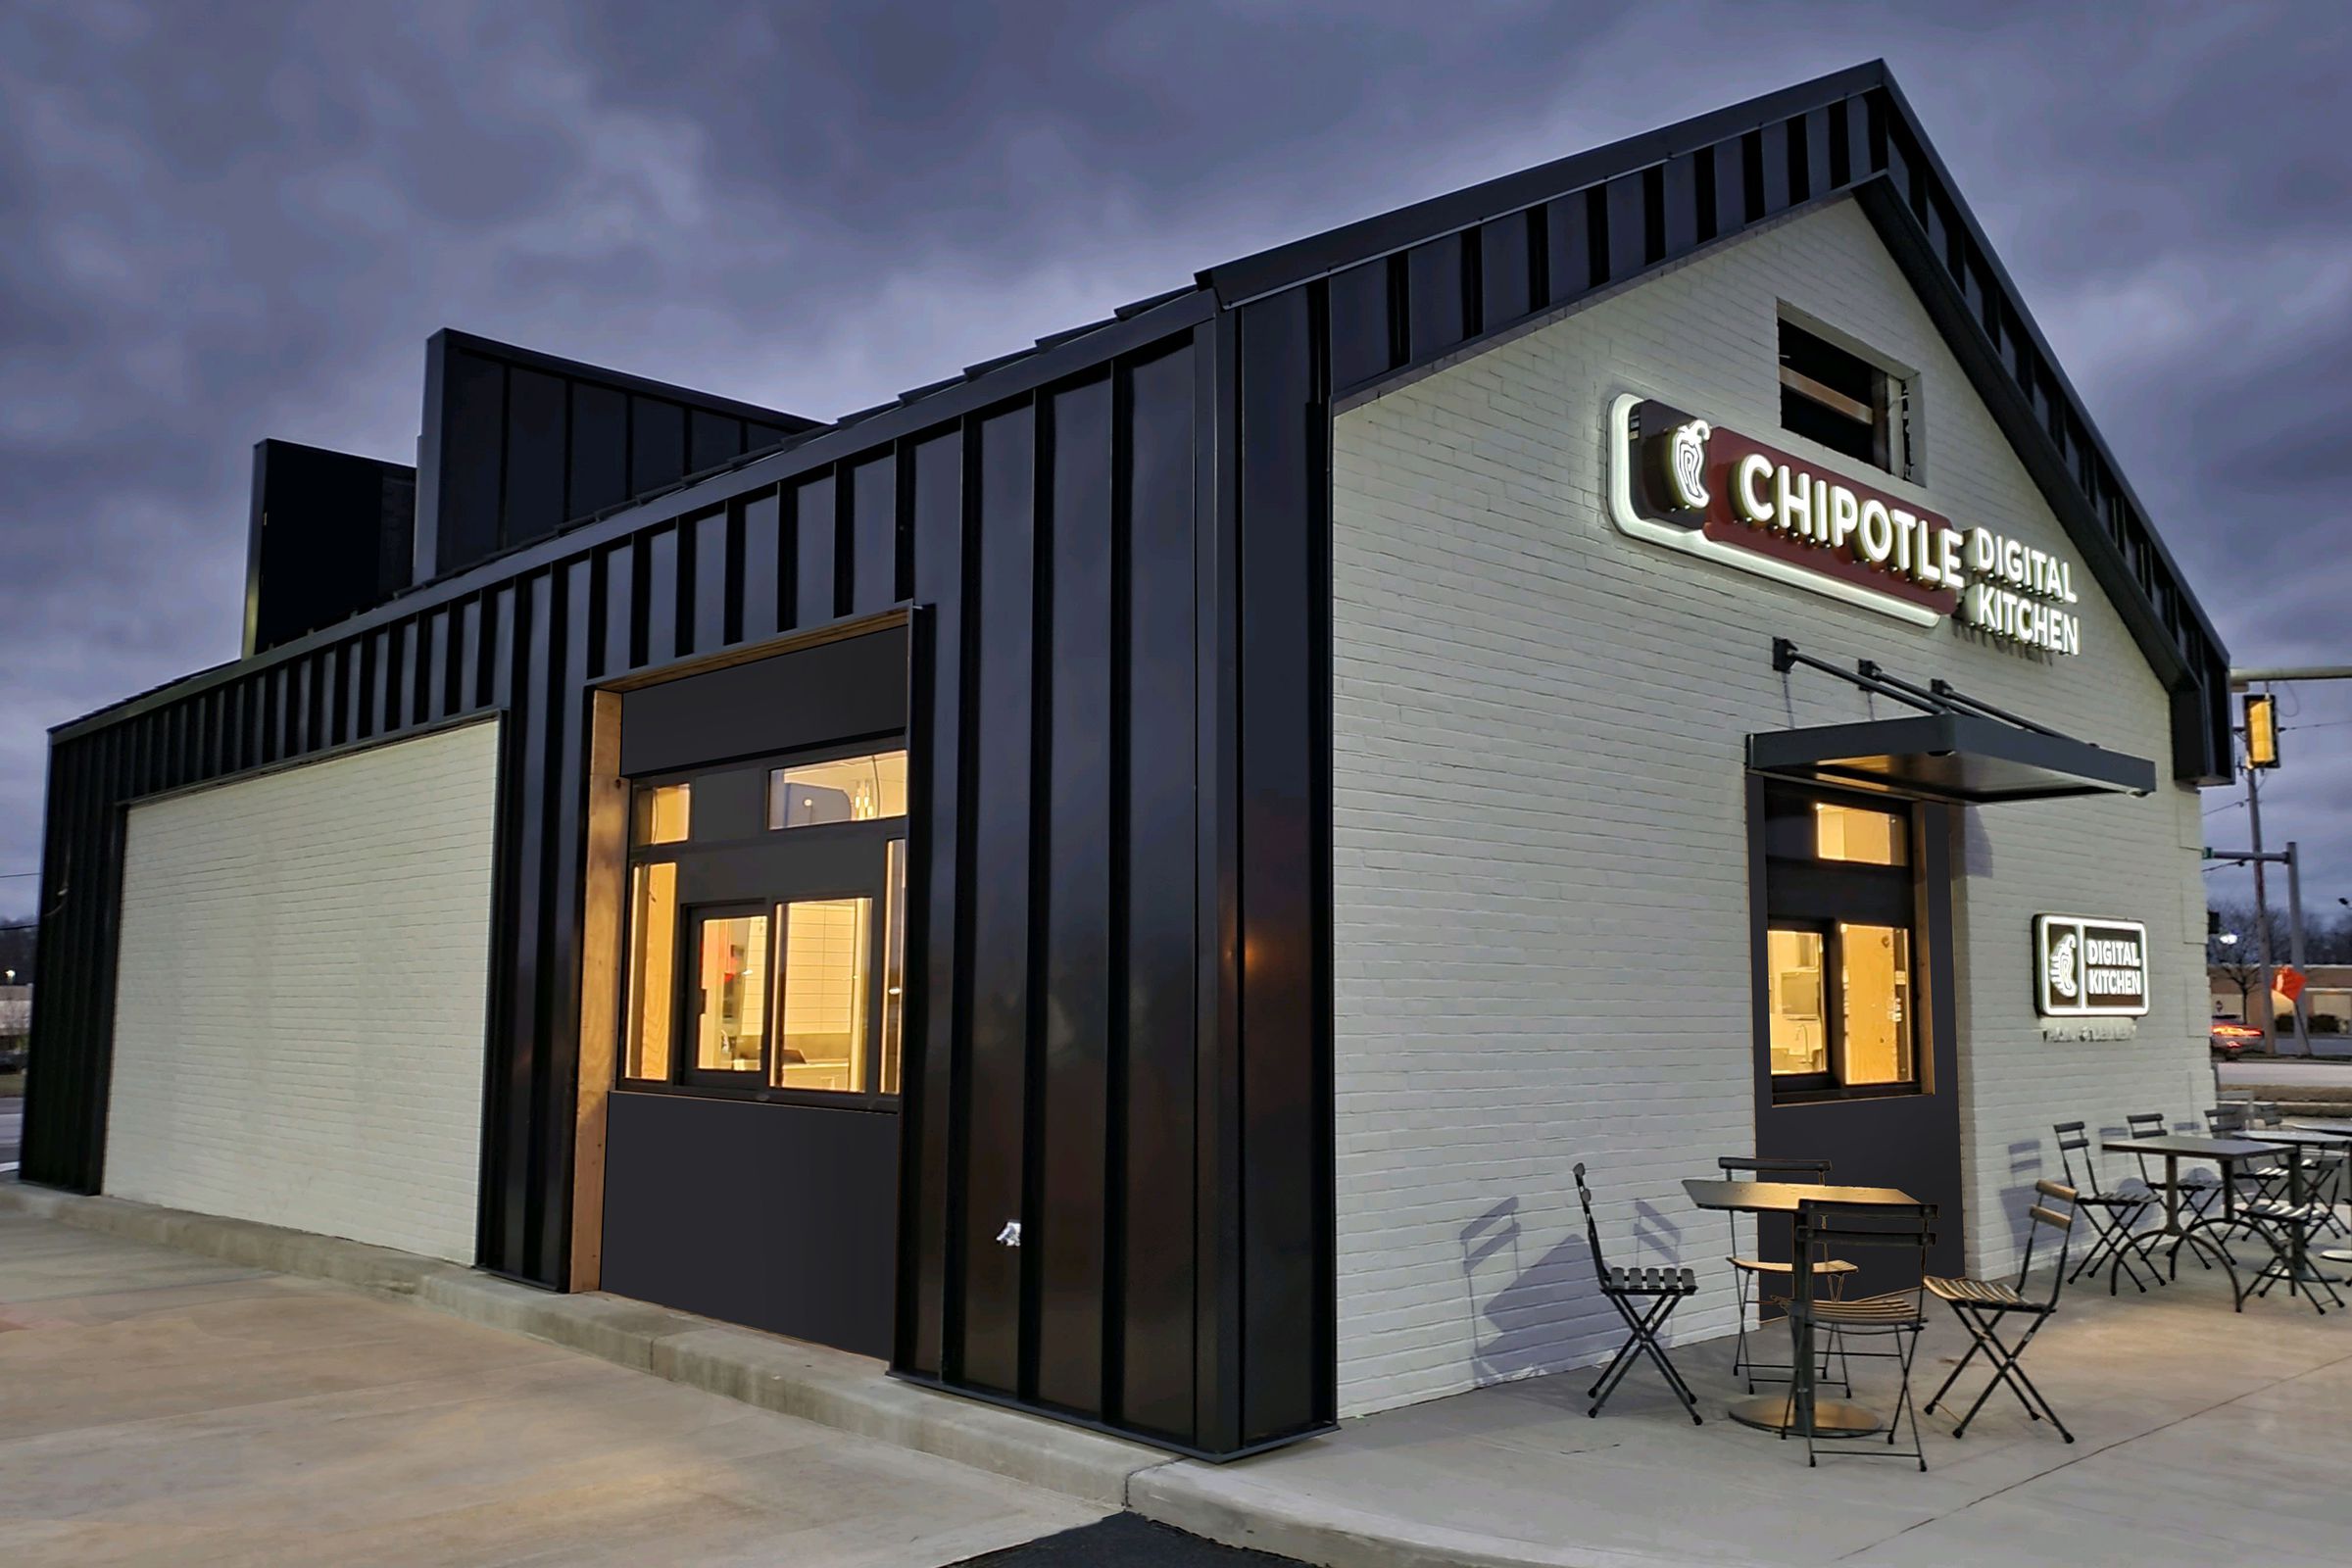 Chipotle’s Digital Kitchen for Pickup & Delivery kind of looks like a regular Chipotle